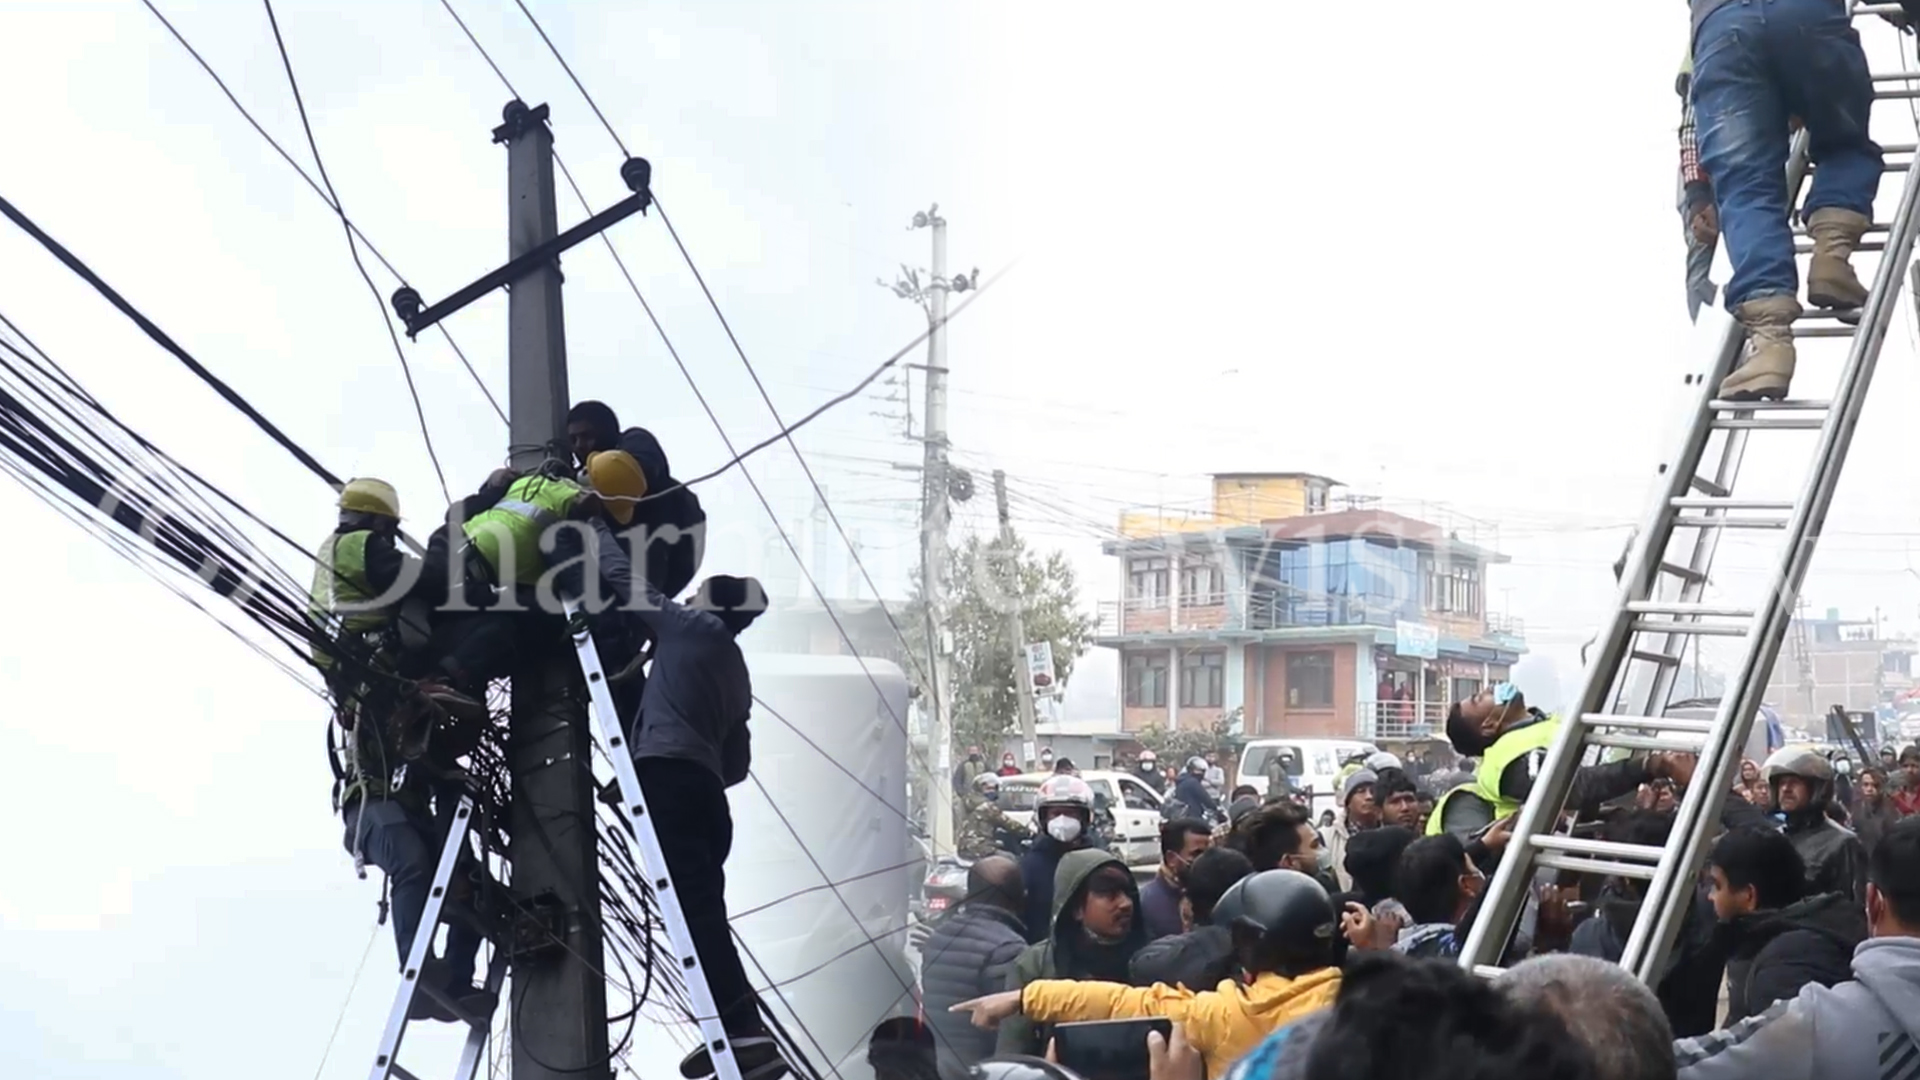 A person died off electric shock in Bhaktapur 